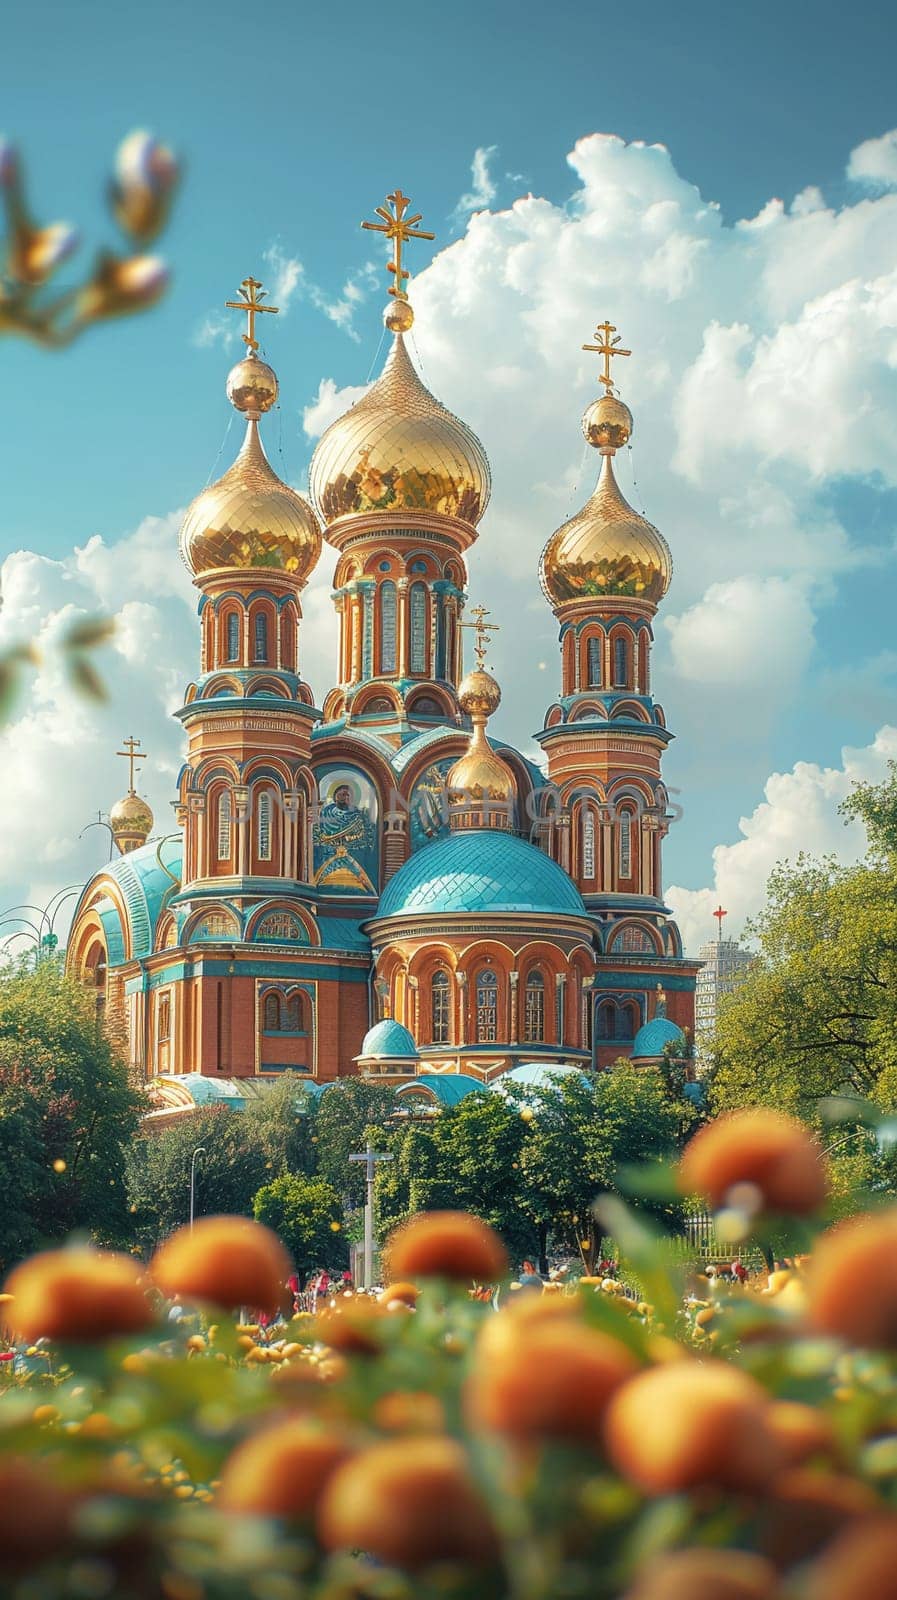 Orthodox Russian Onion Domes Against a Blurred Sky, The domes meld with the clouds, iconic of Russia's religious architecture and faith.